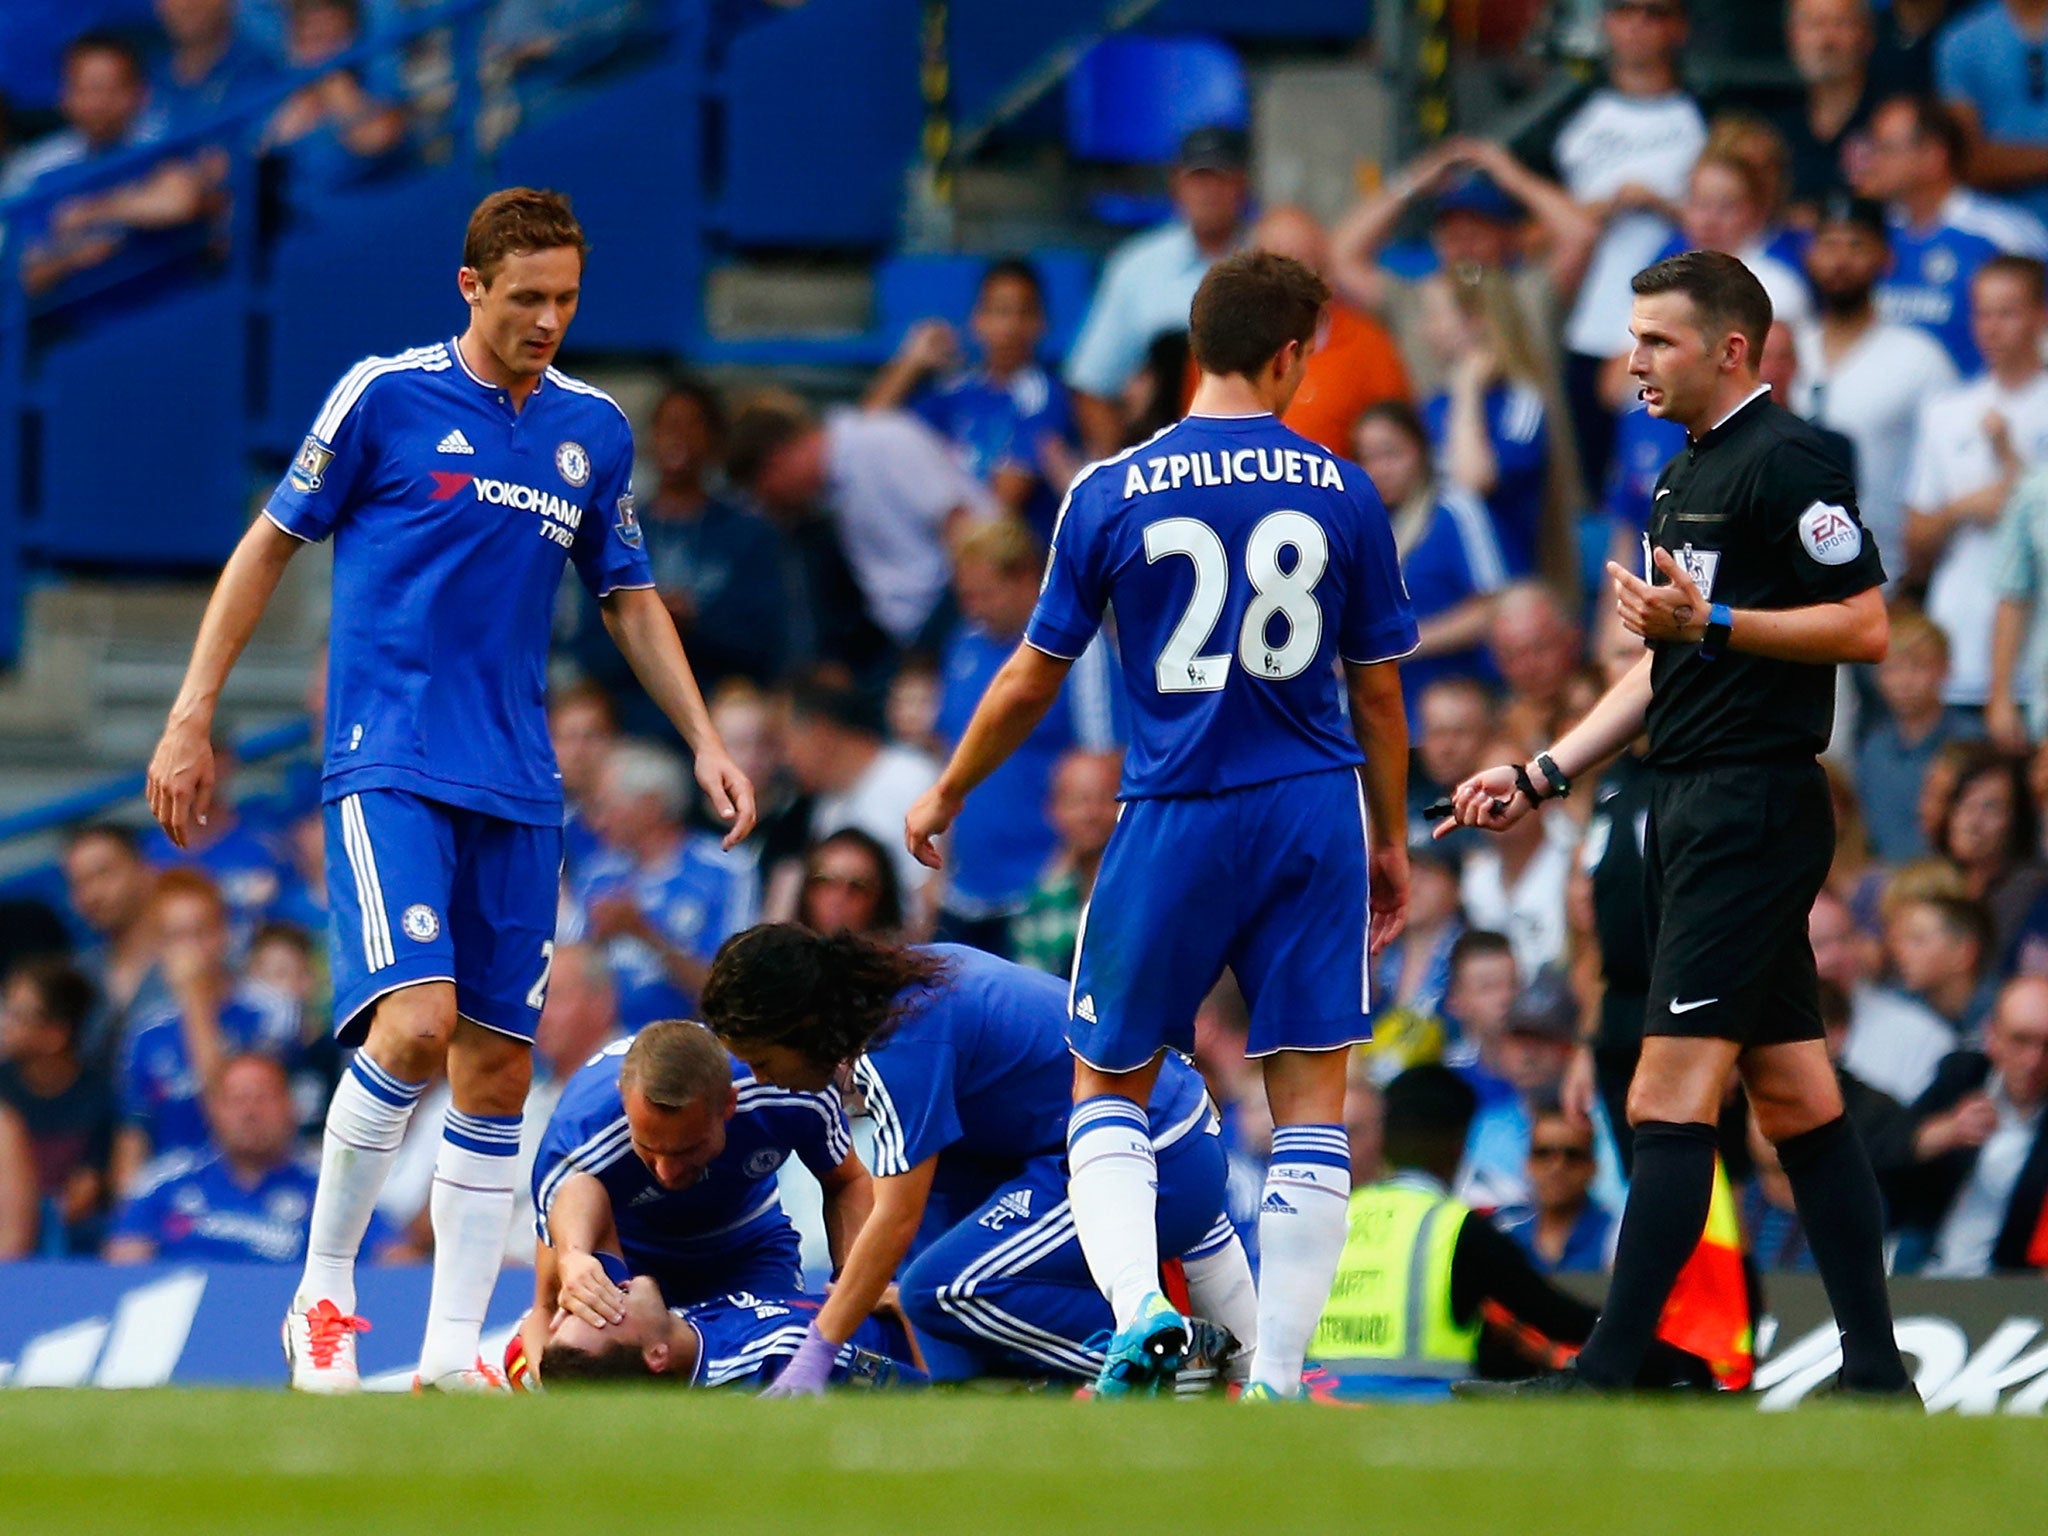 Eden Hazard recieves treatment from medics during Chelsea's 2-2 draw with Swansea